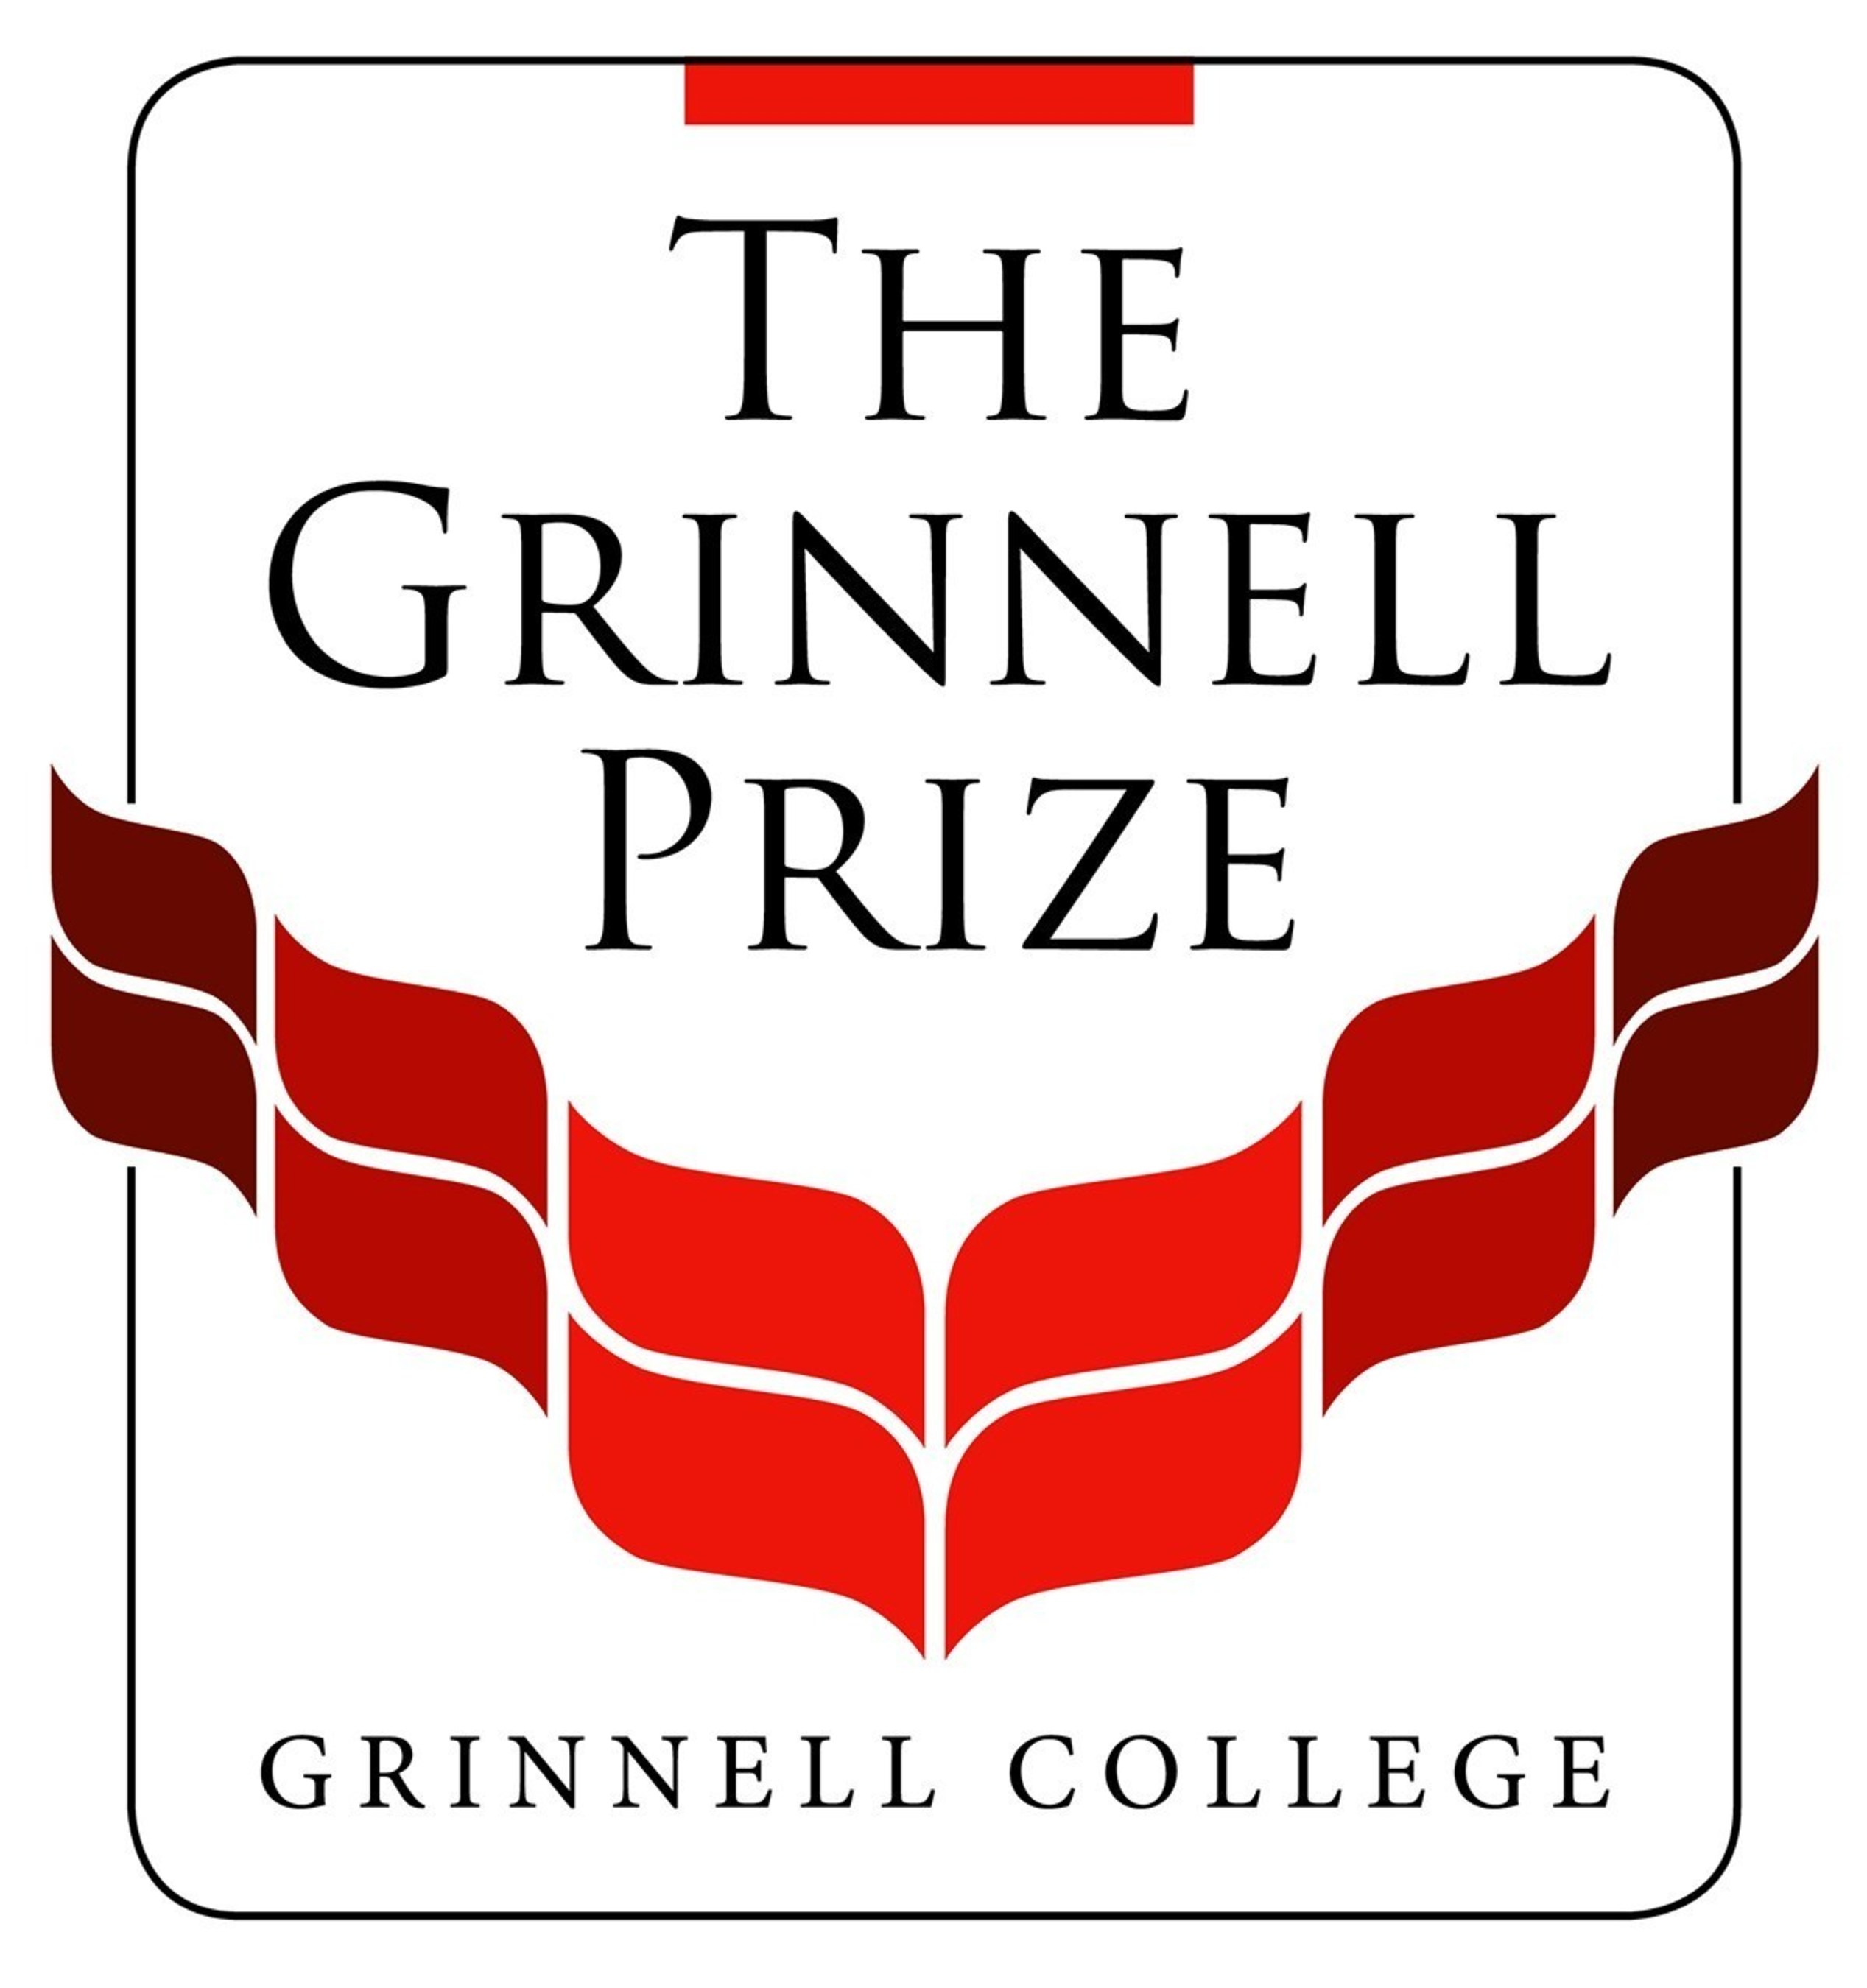 The Grinnell Prize